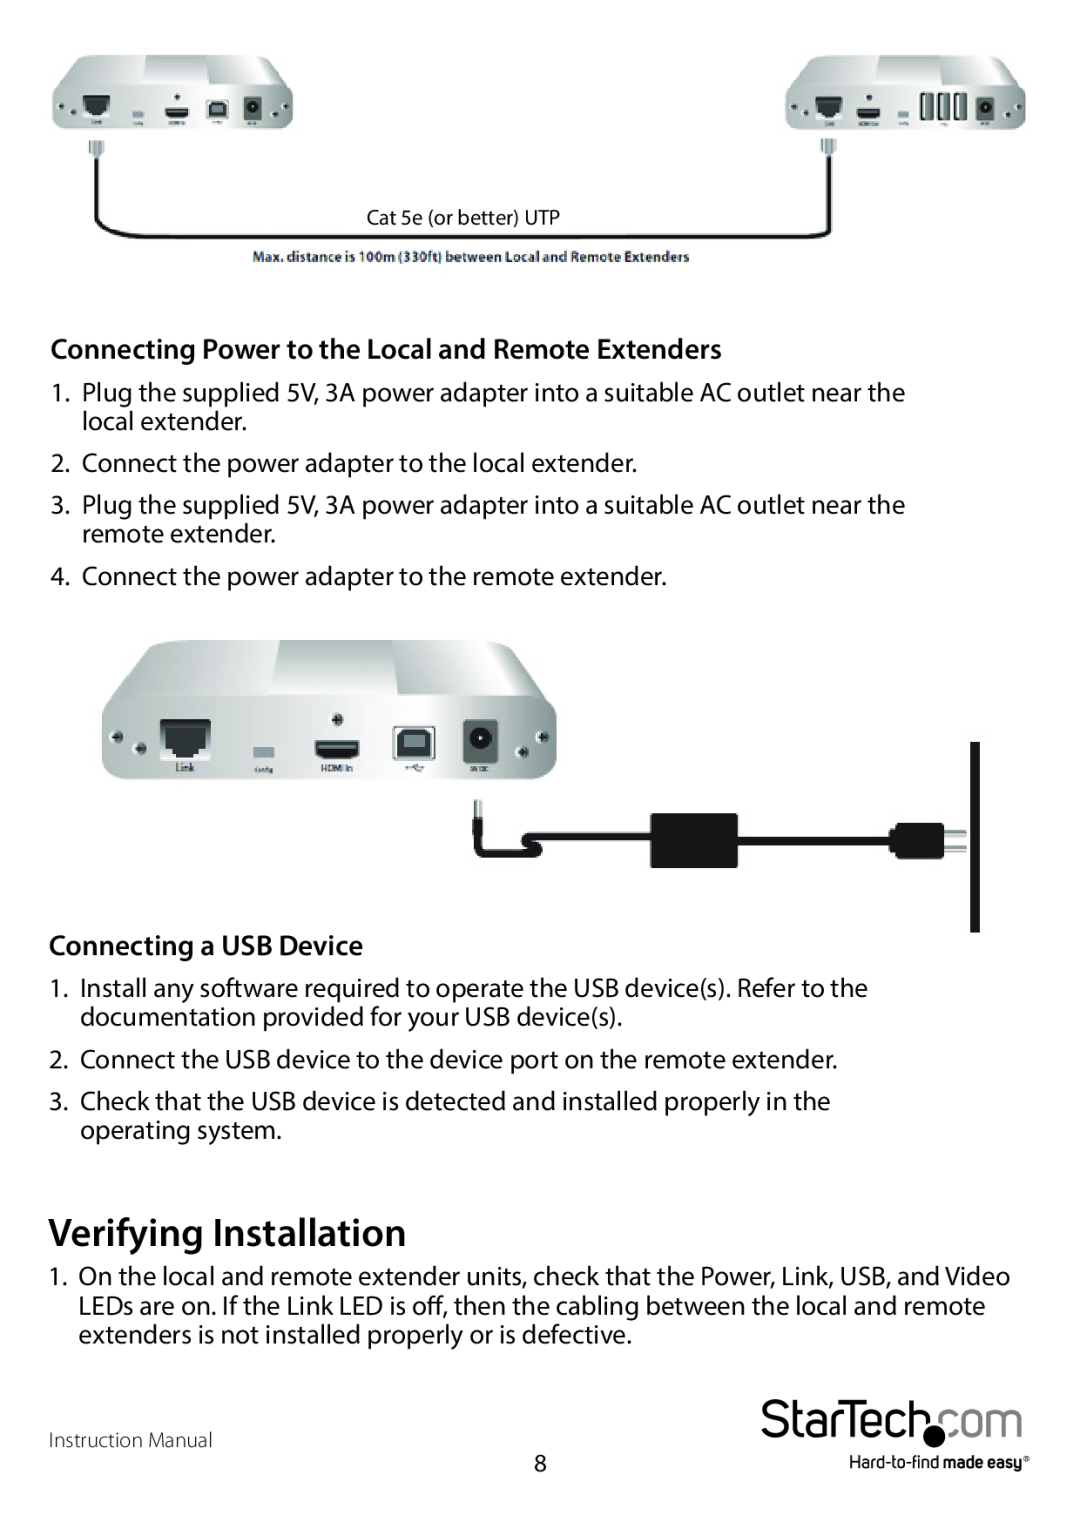 StarTech.com dvi over cat5e/6 kvm extender Verifying Installation, Connecting Power to the Local and Remote Extenders 